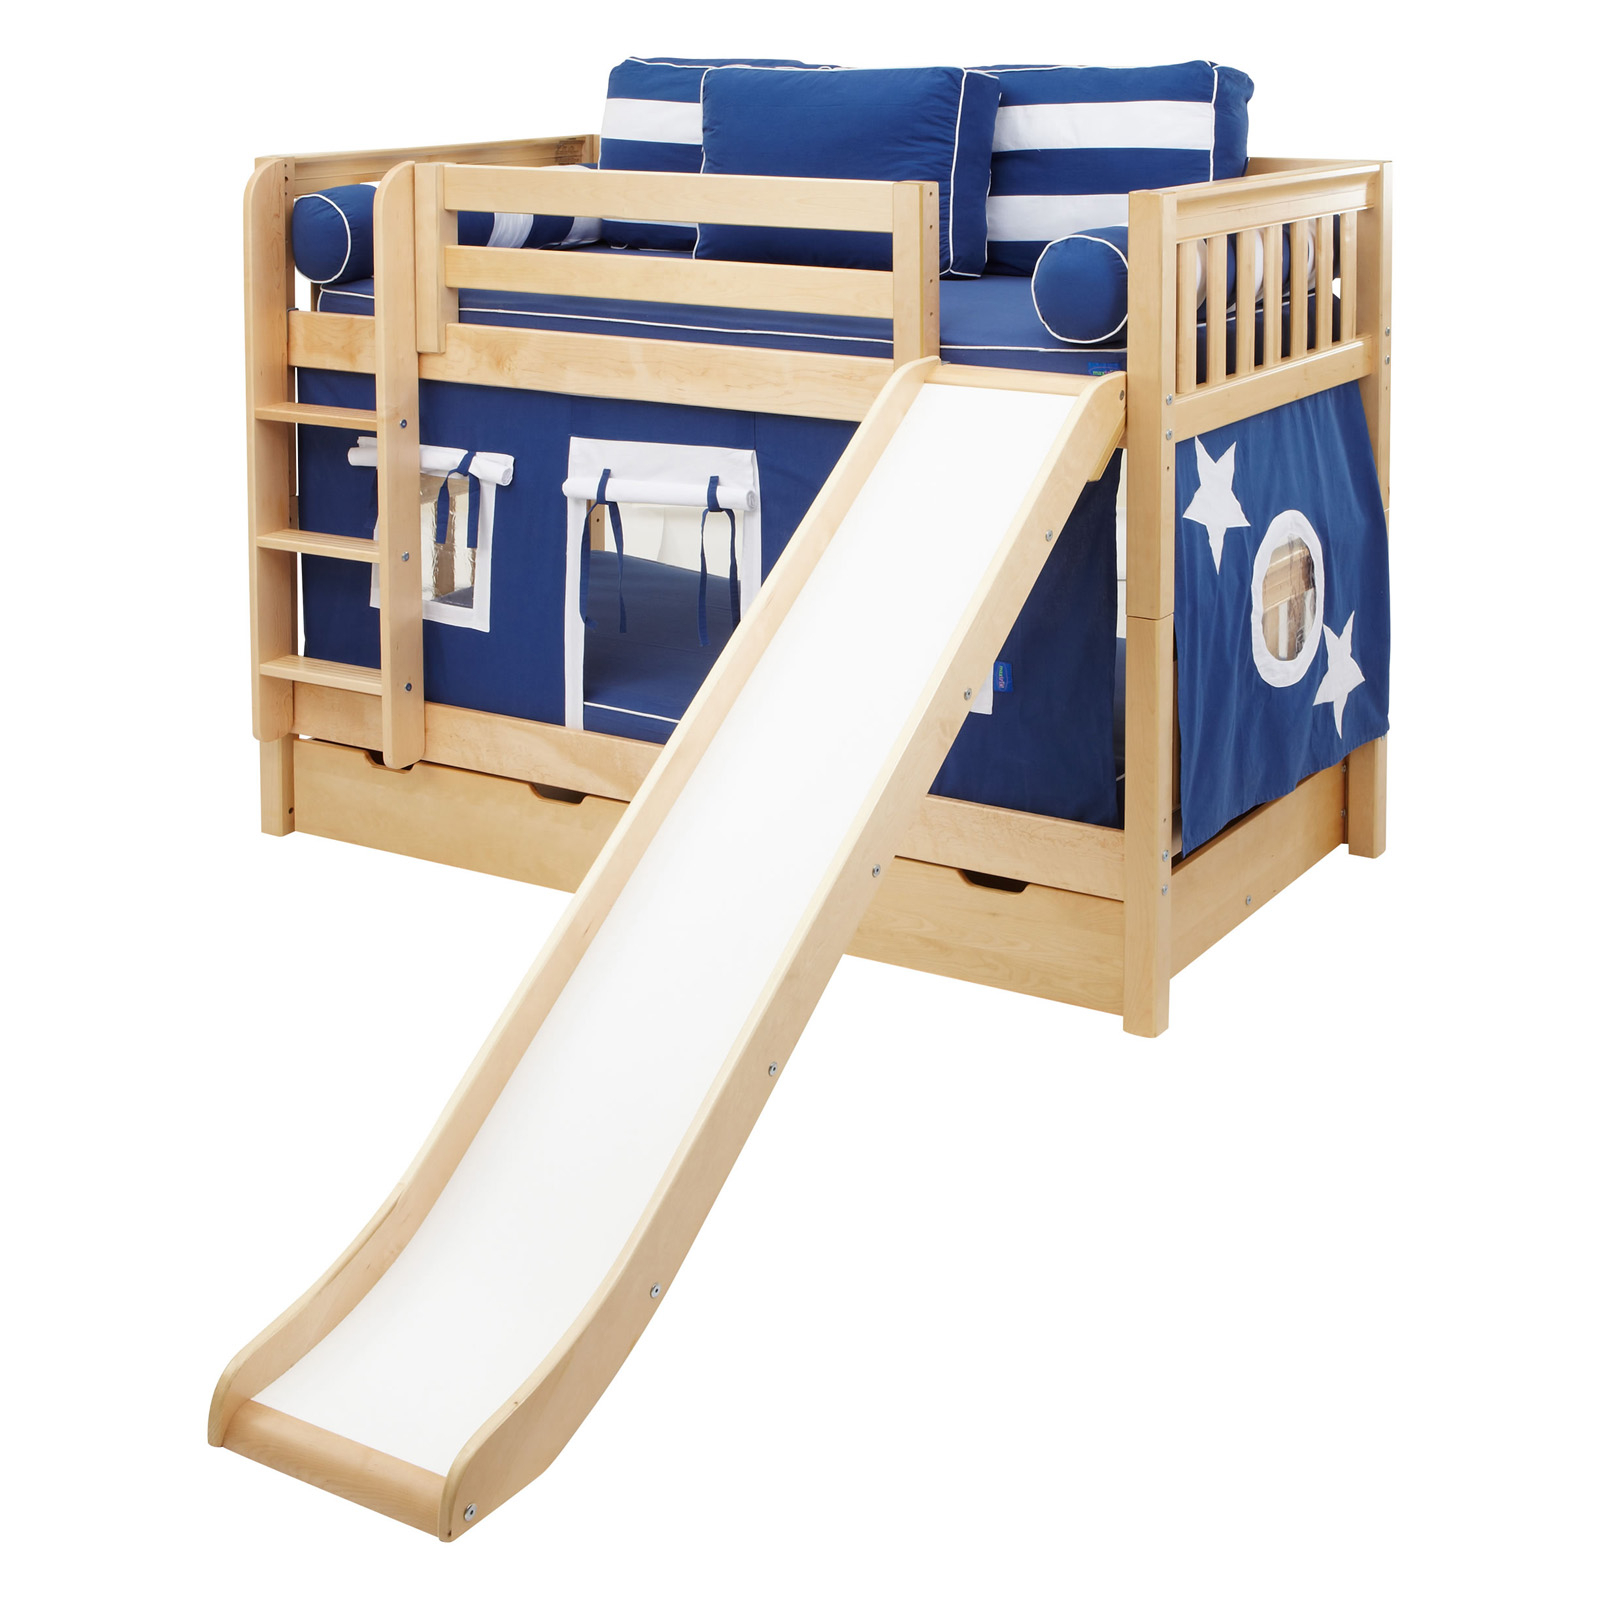 Bunk beds with a slide